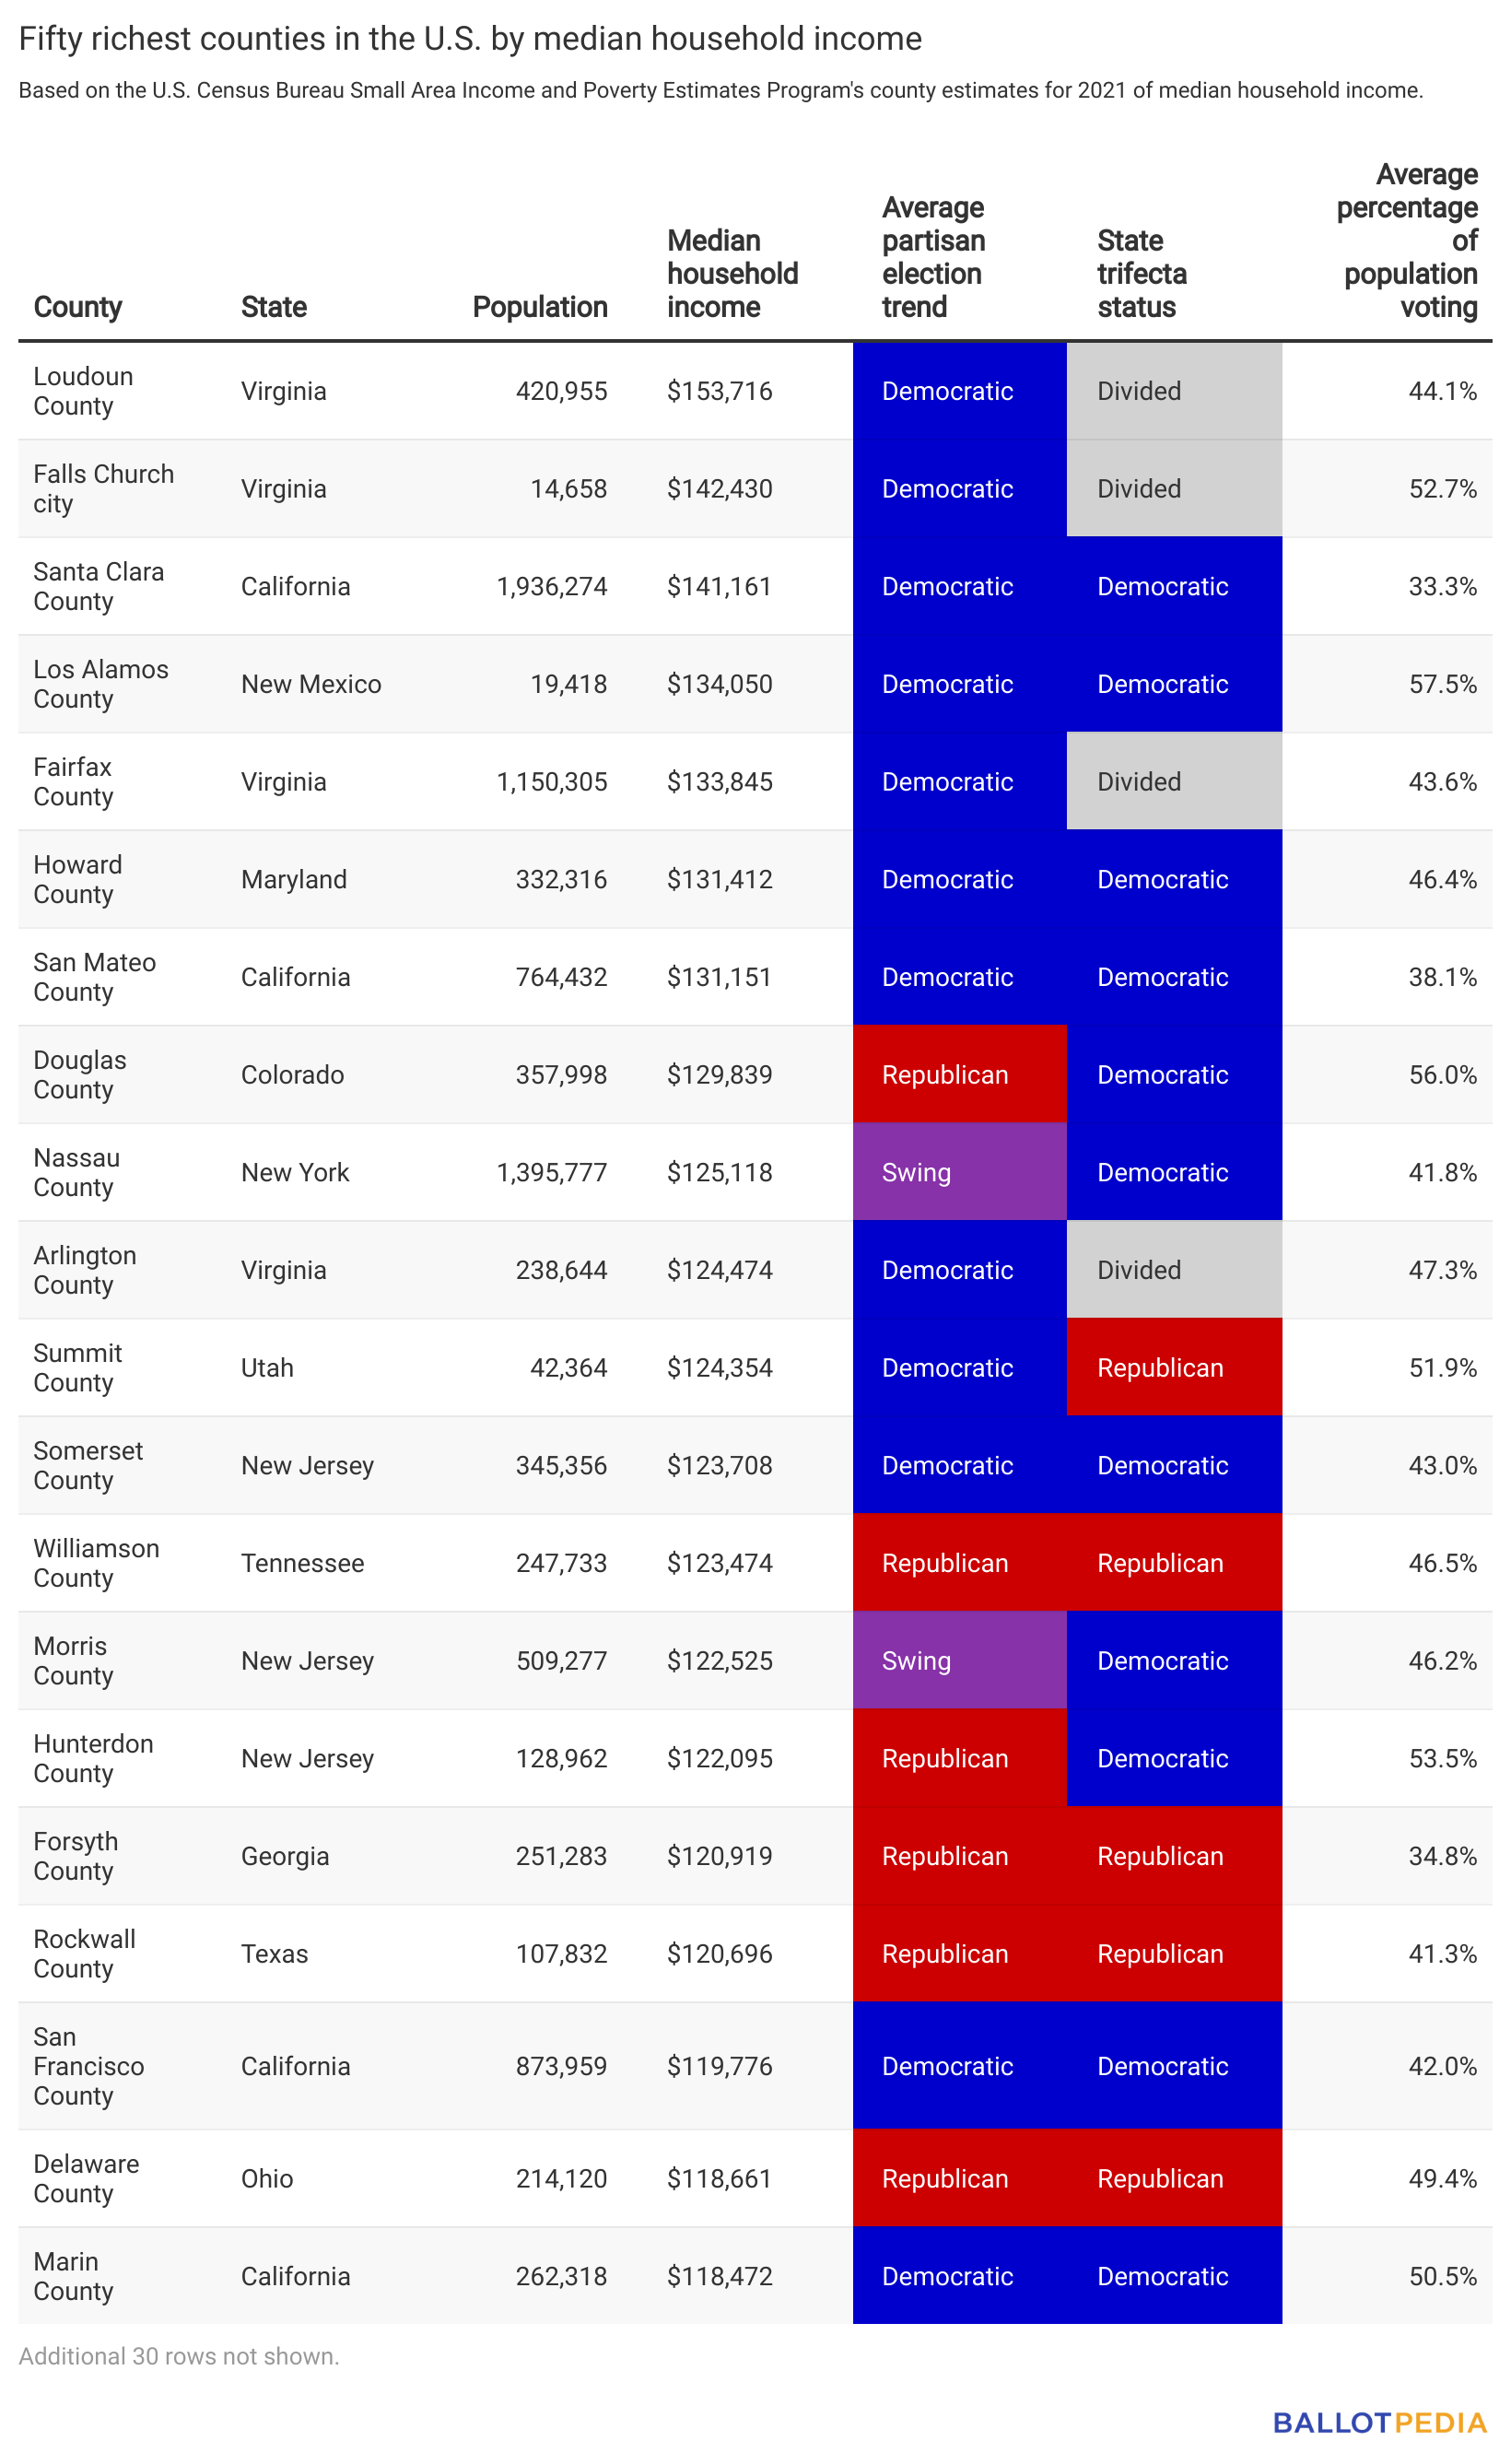 Table showing Fifty richest counties in the U.S. by median household income.